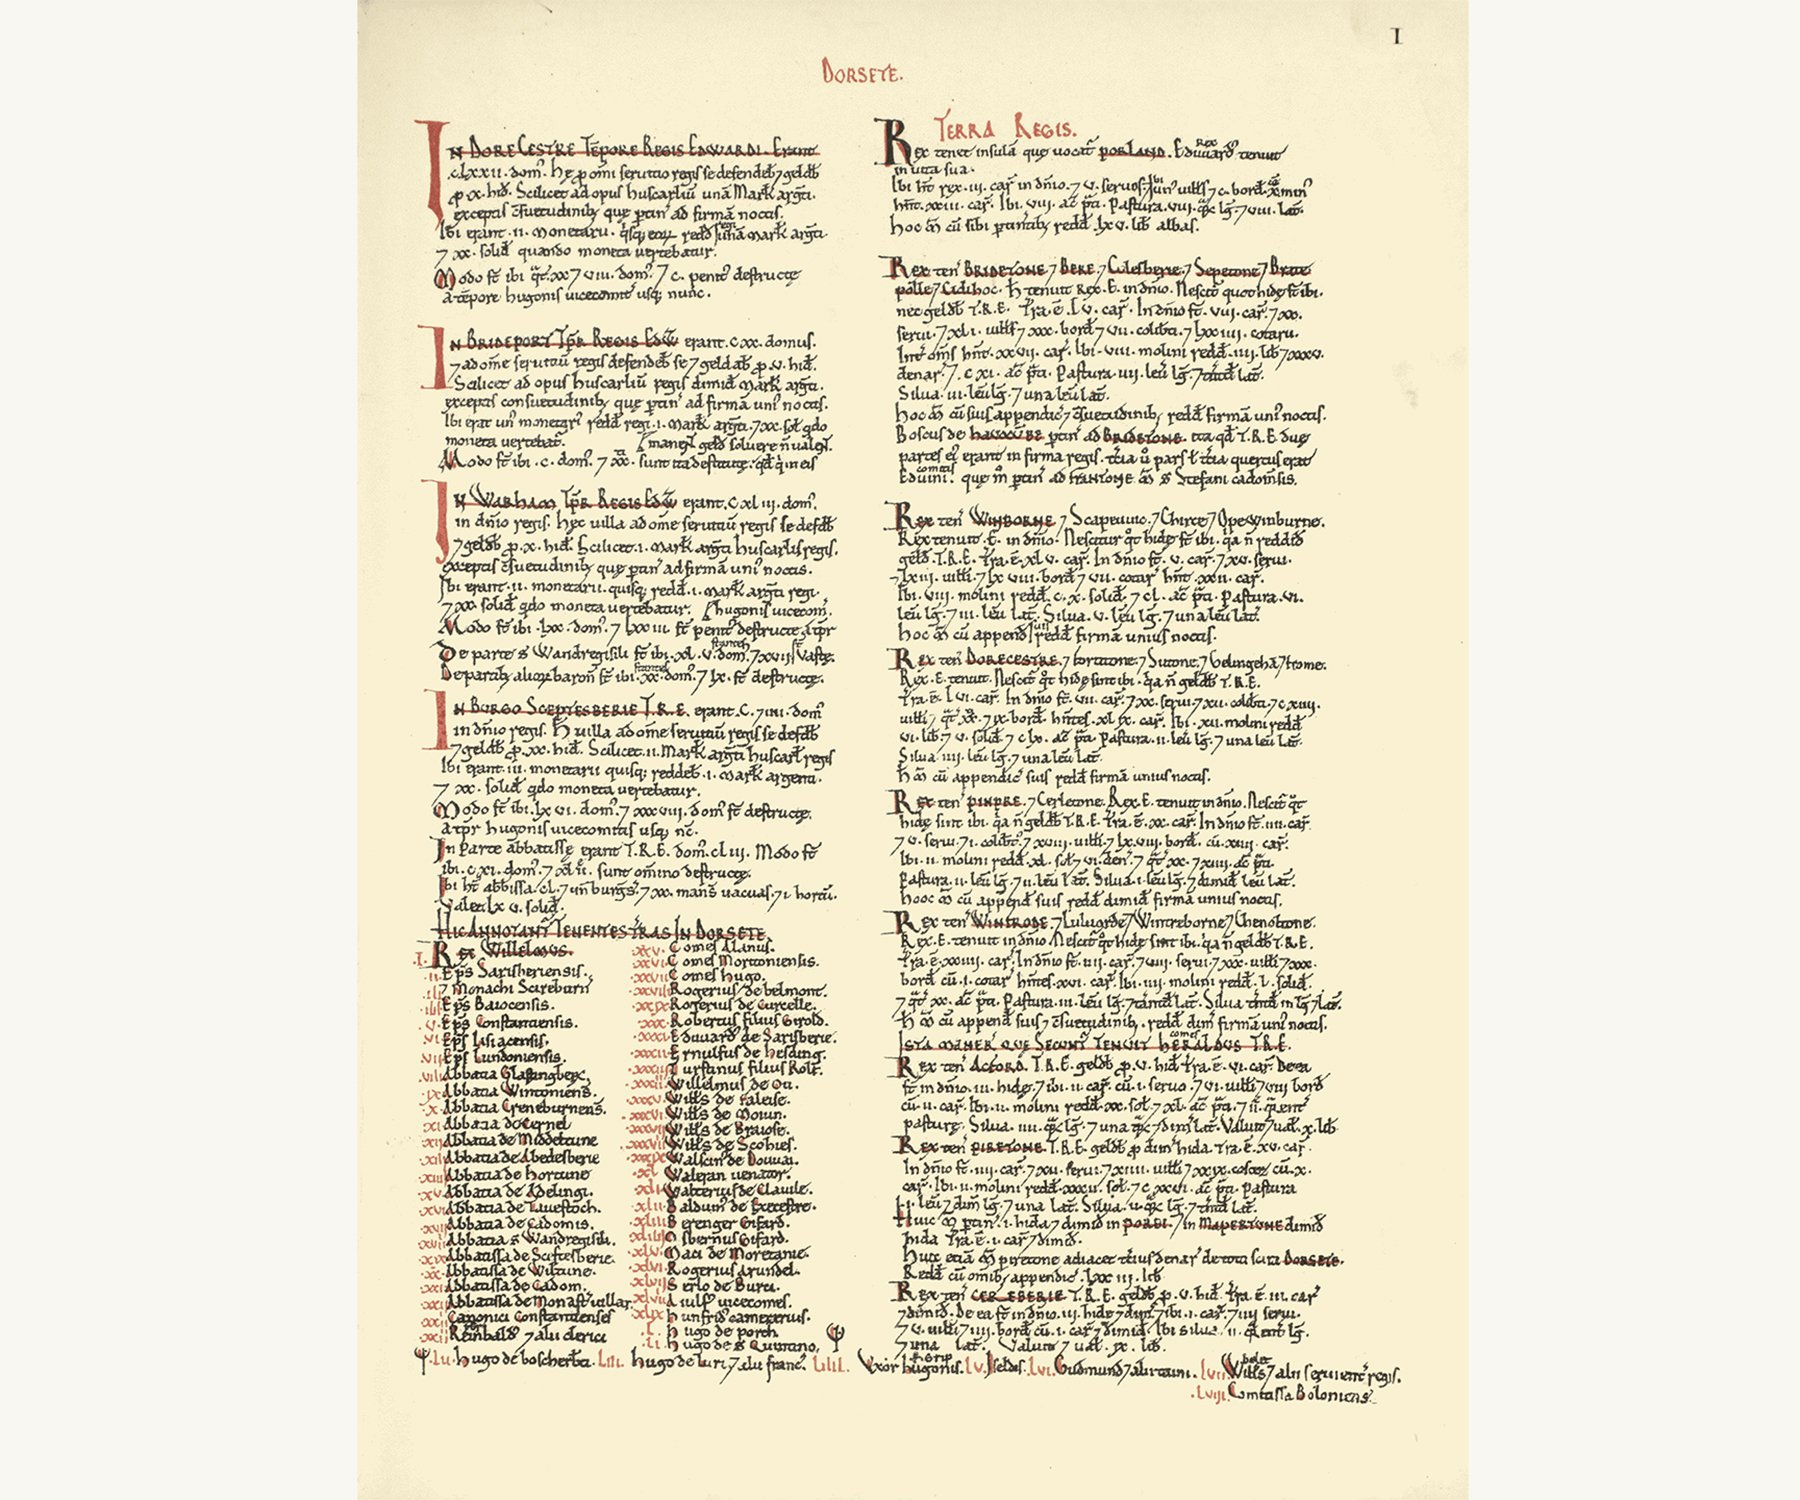 A page from the Domesday Book which includes the record for Winterborne